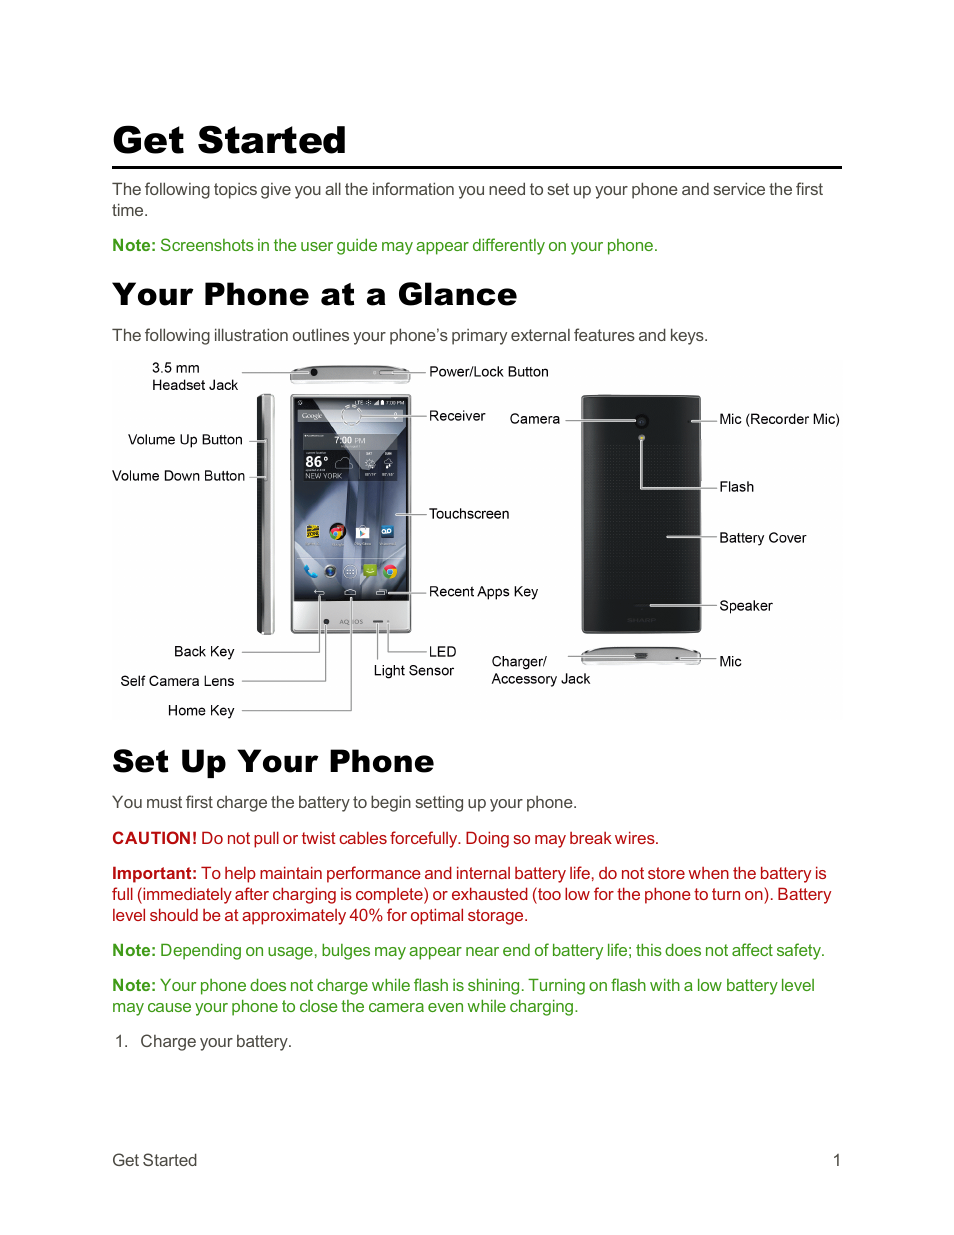 Get started, Your phone at a glance, Set up your phone | Sharp AQUOS Crystal User Manual | Page 11 / 171